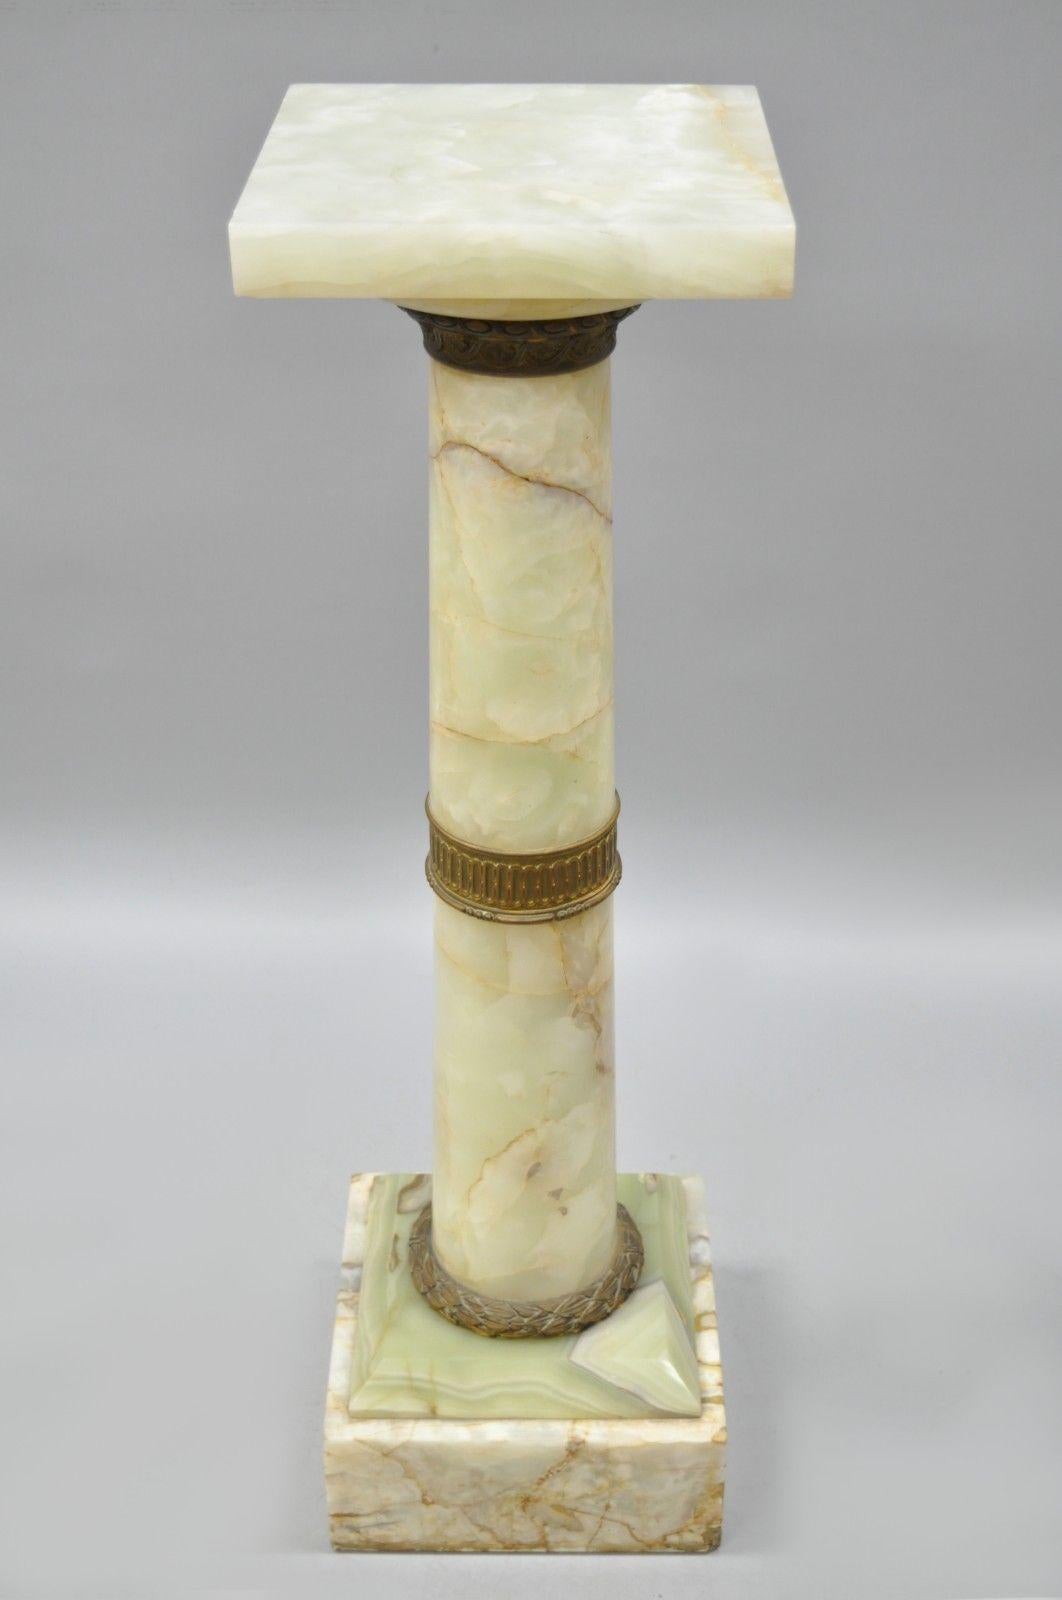 Classical Greek 19th Century Onyx & Bronze Column Statue Pedestal French Empire Style Revolving For Sale